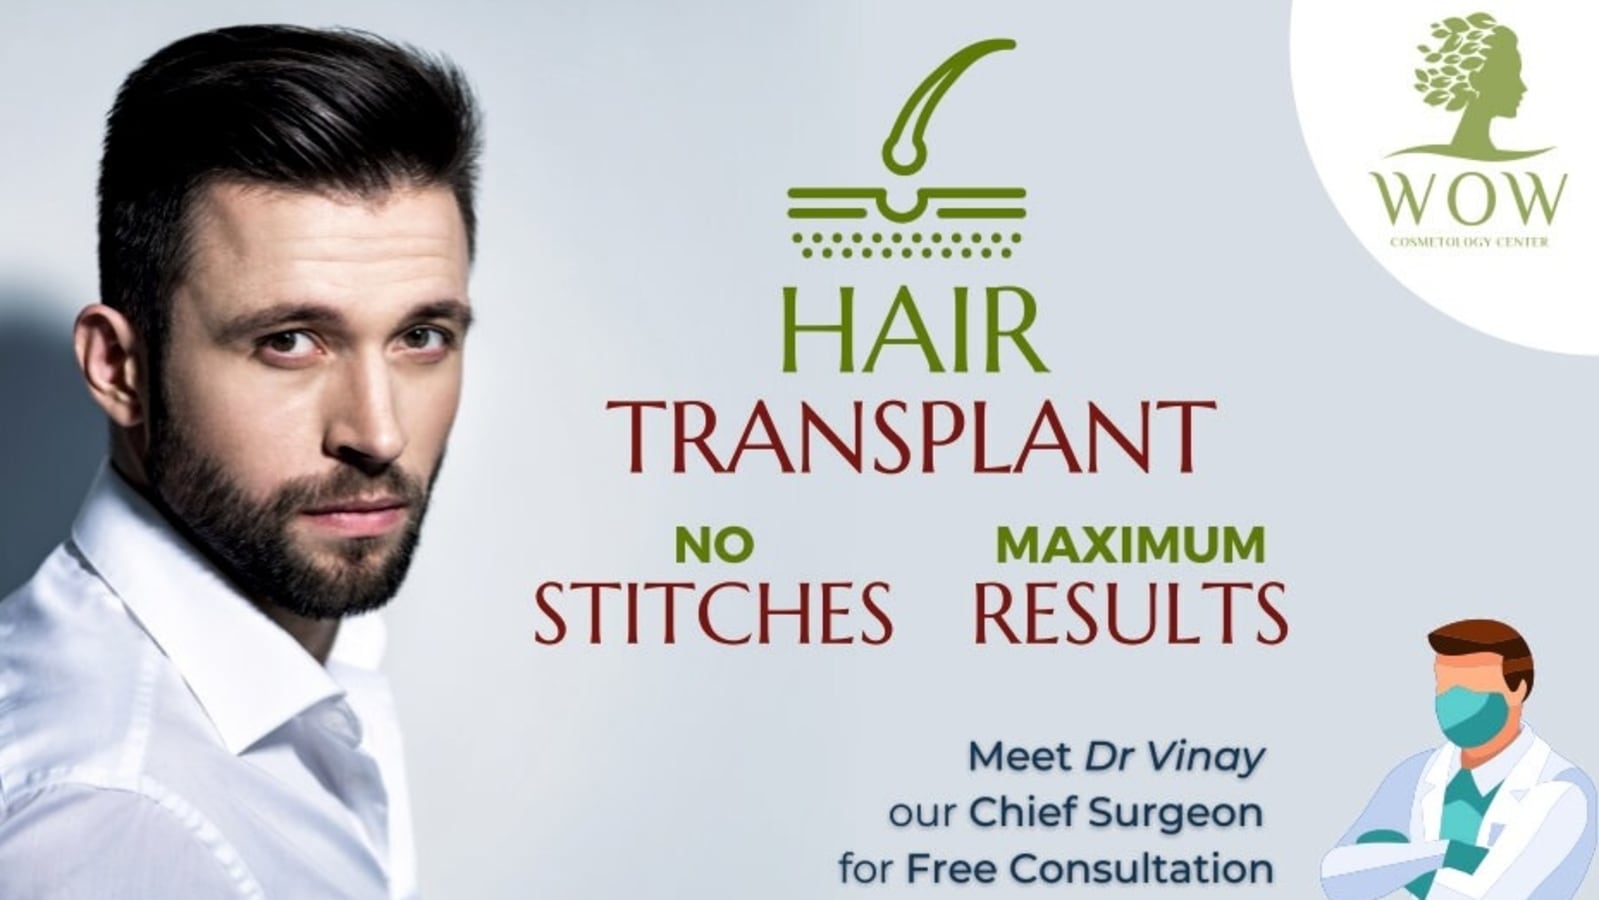 Best 3 Hair Transplant Clinics and Hair Transplant Costs in Turkey - The  Good Men Project